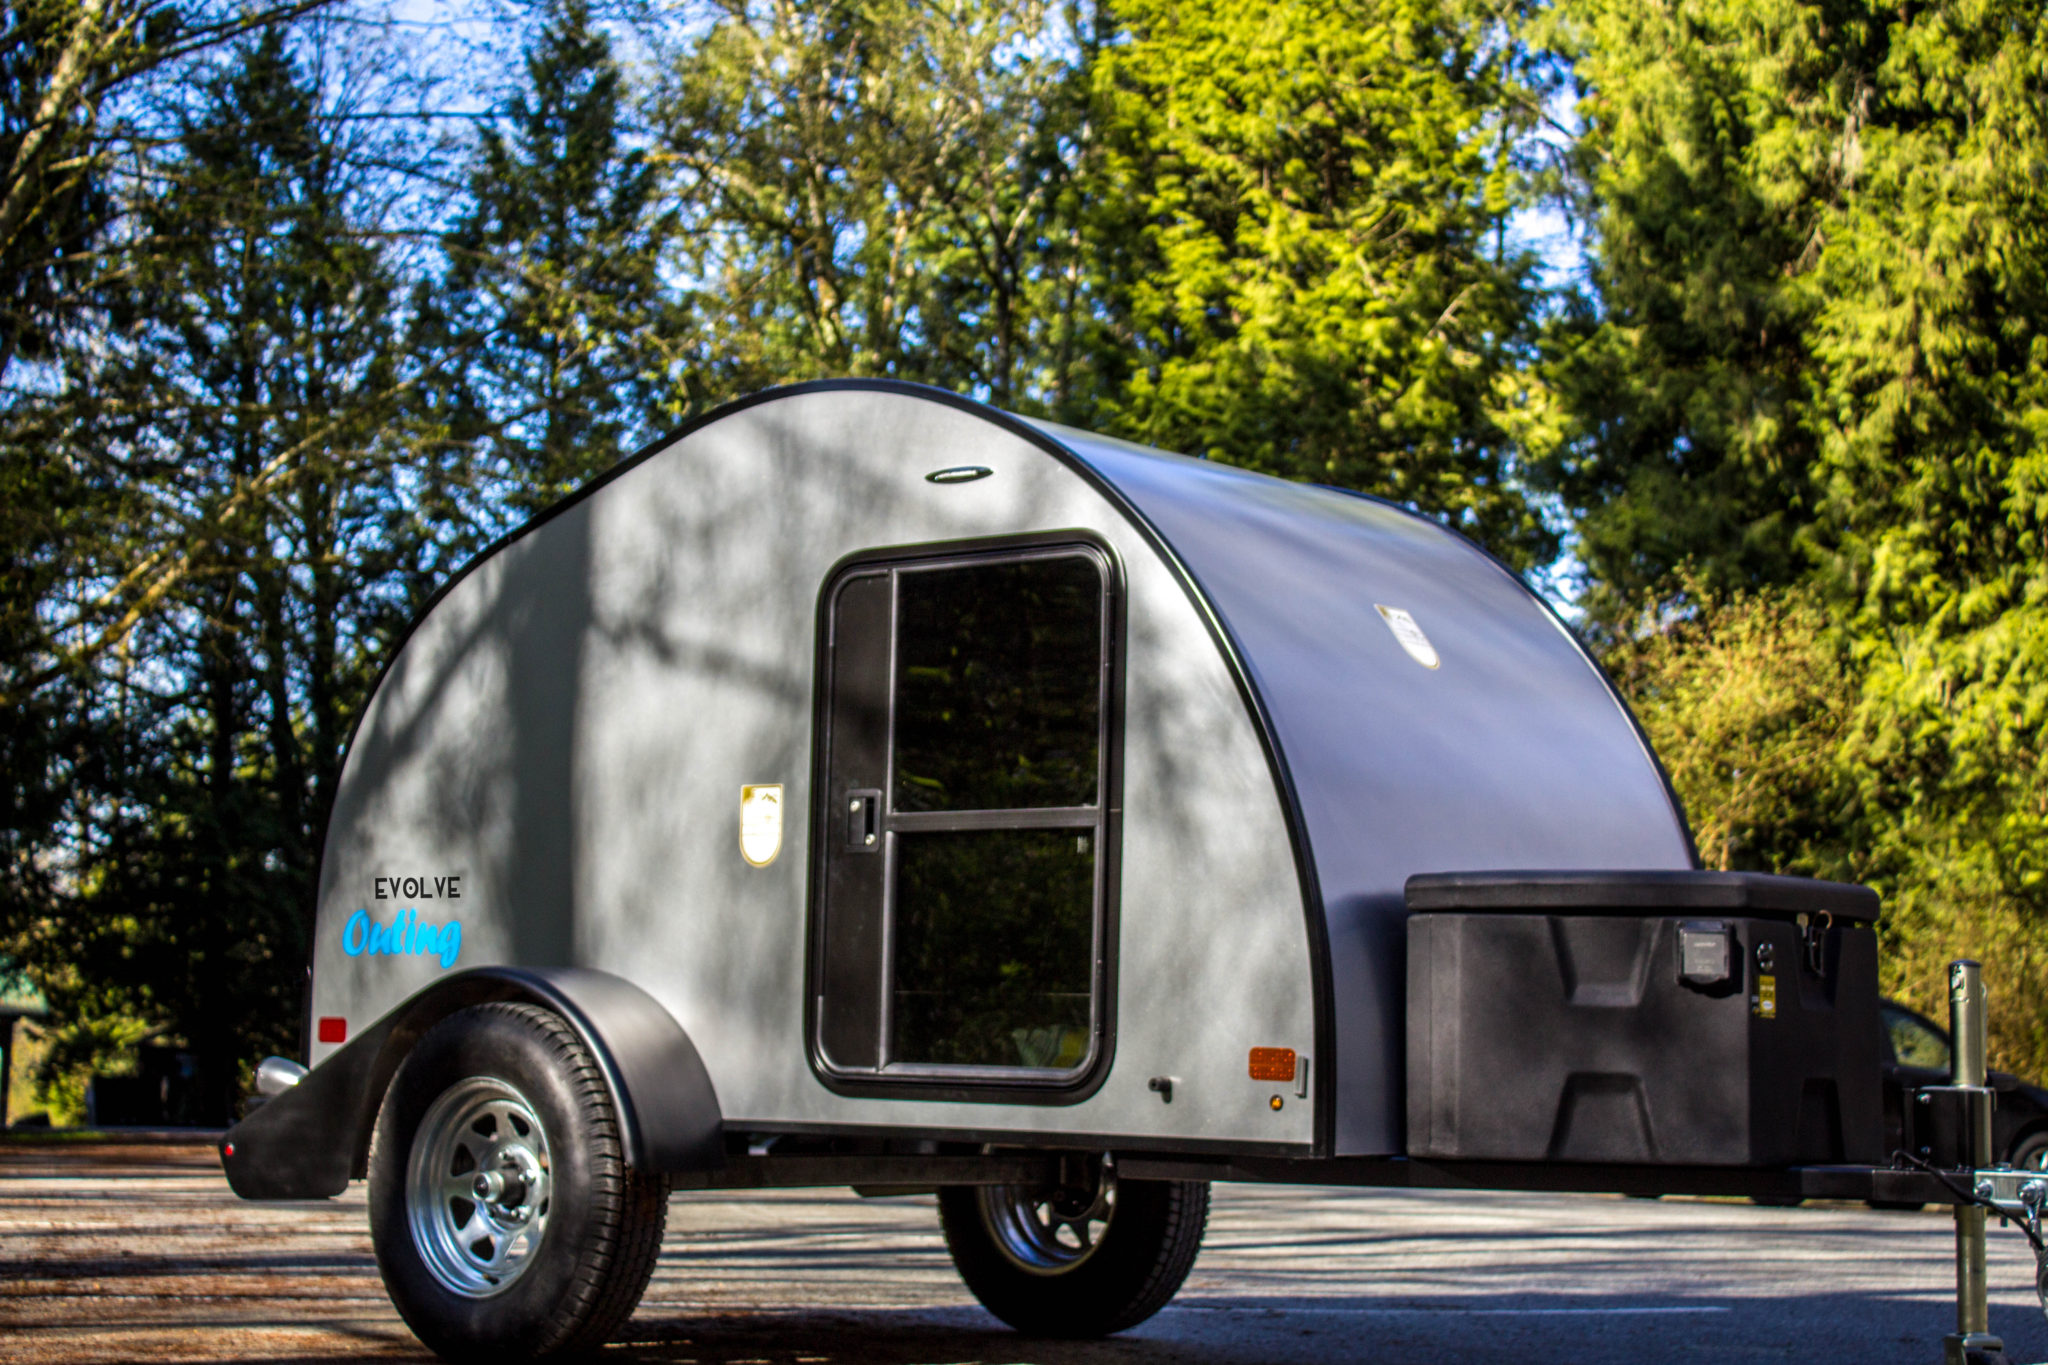 The Evolve Outing Solar Teardrop Trailer parked at camp site